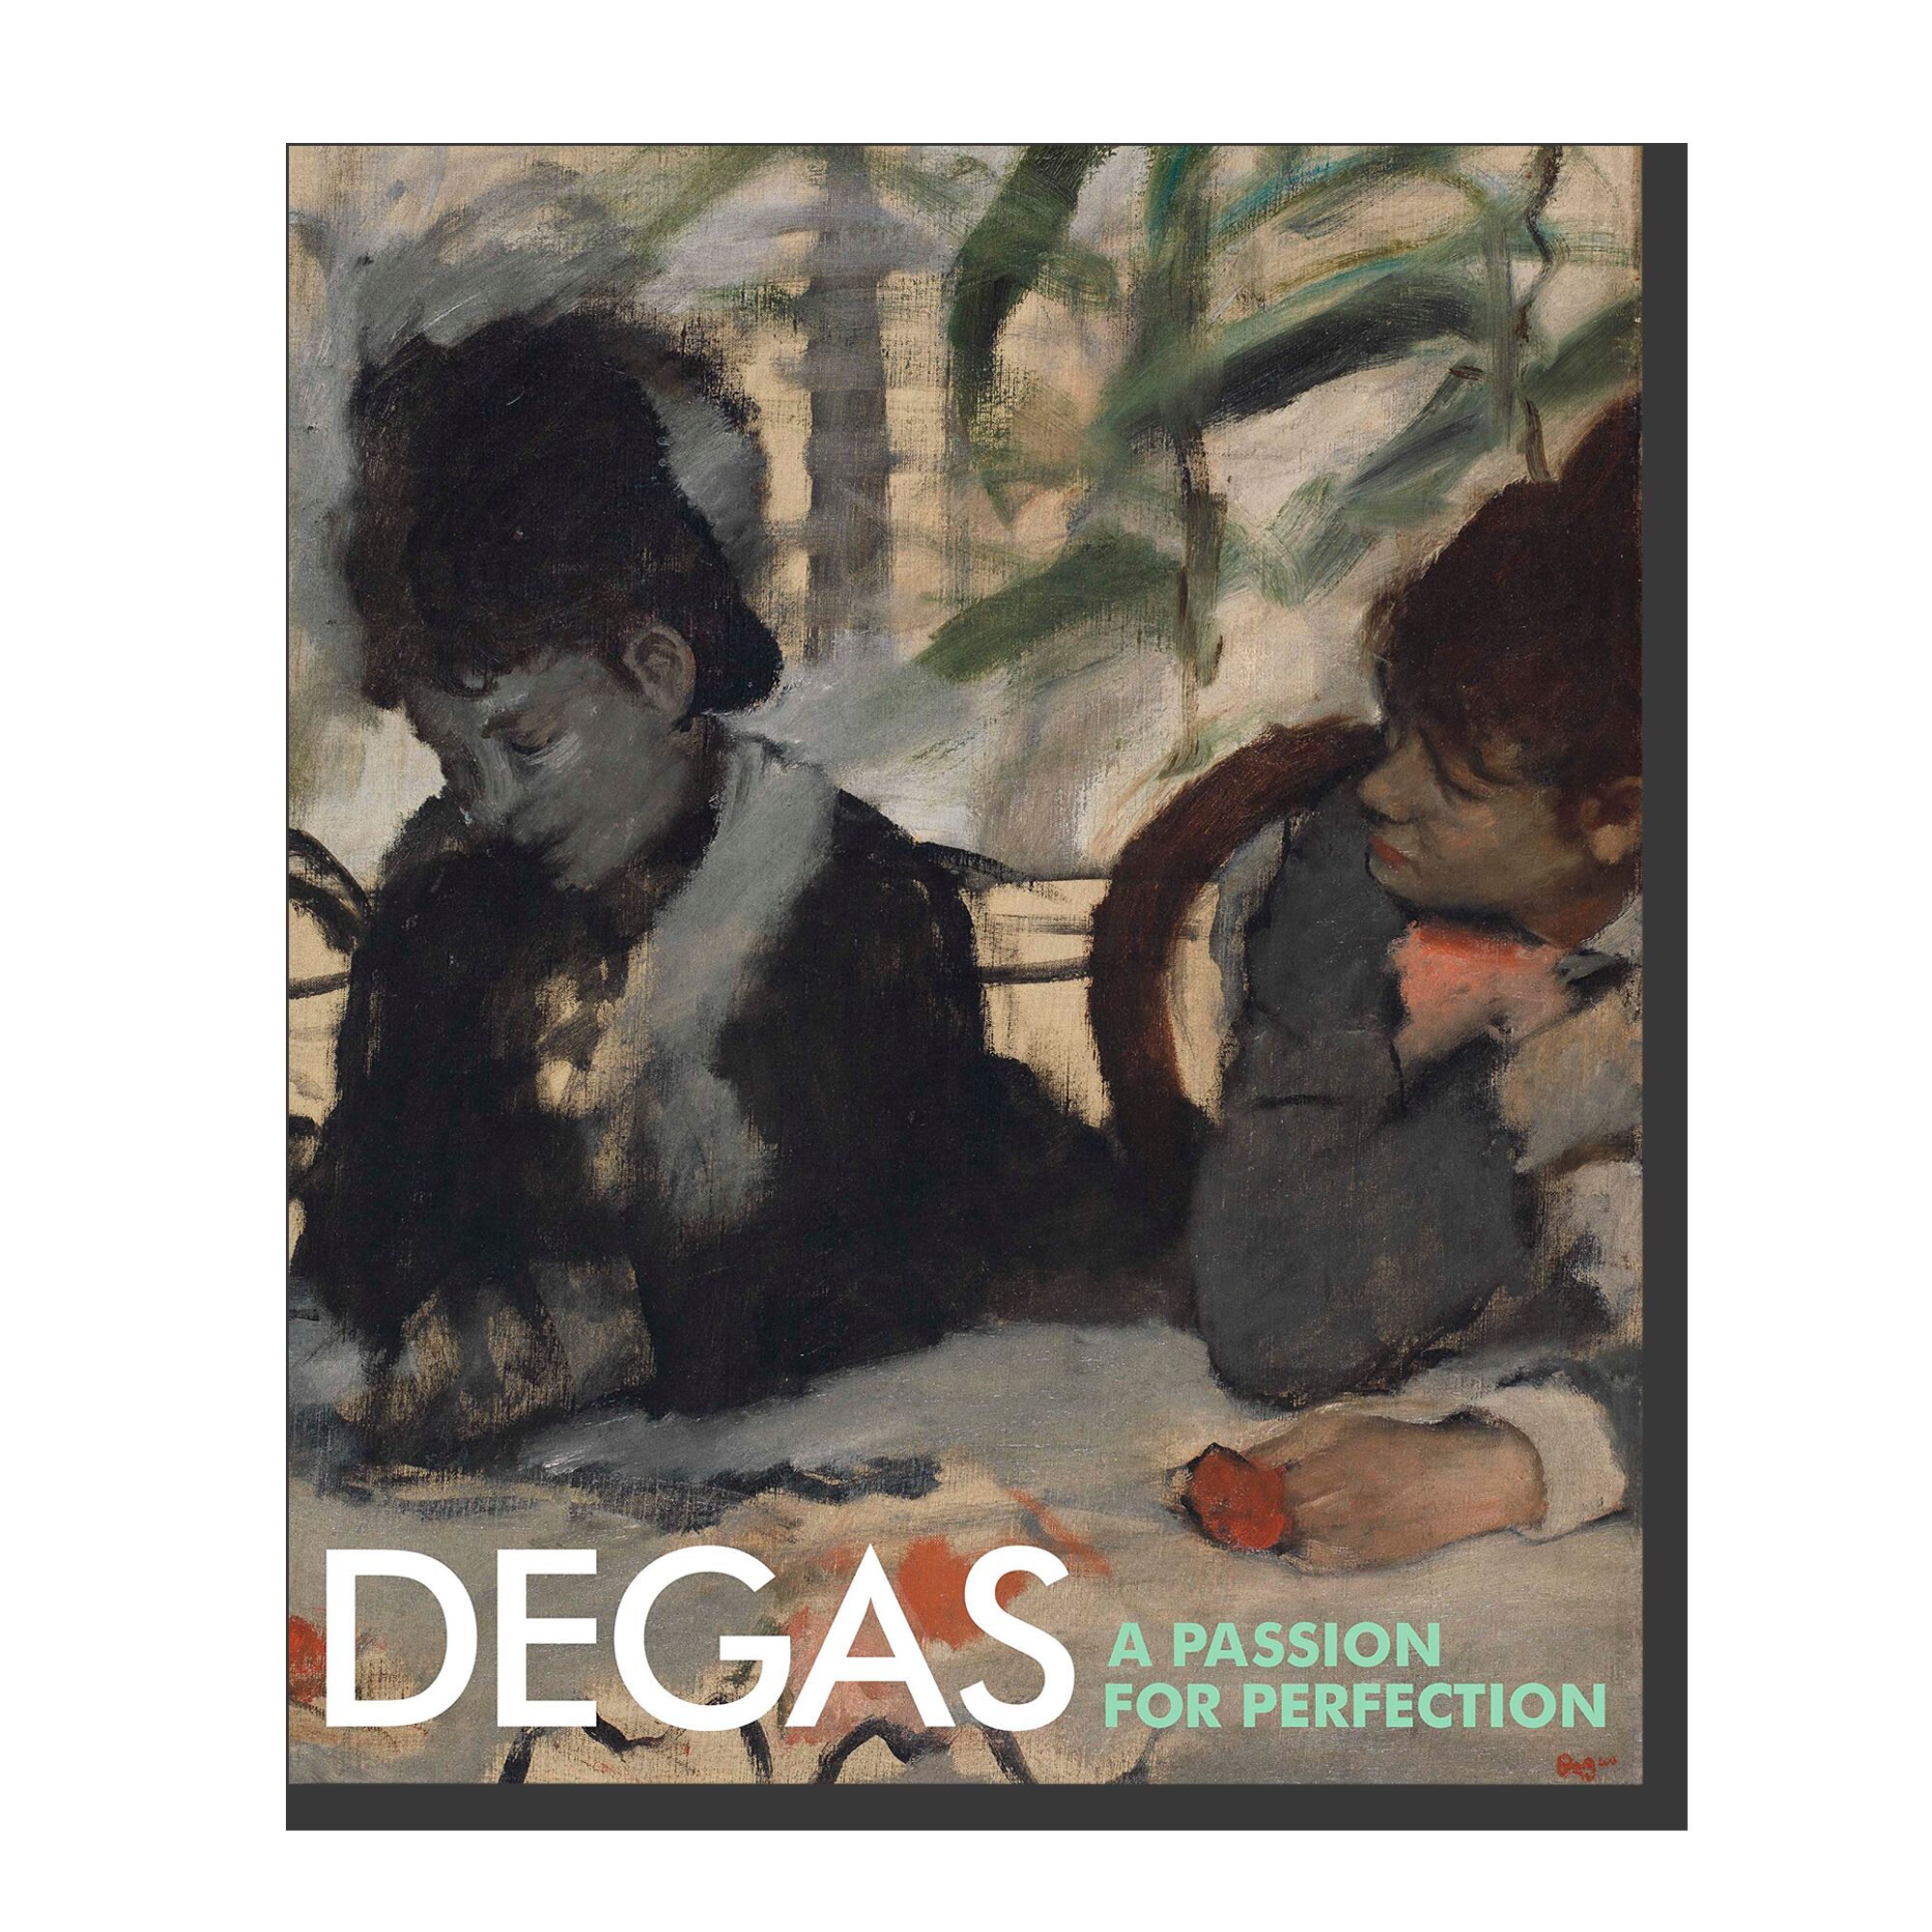 Degas: A Passion for Perfection